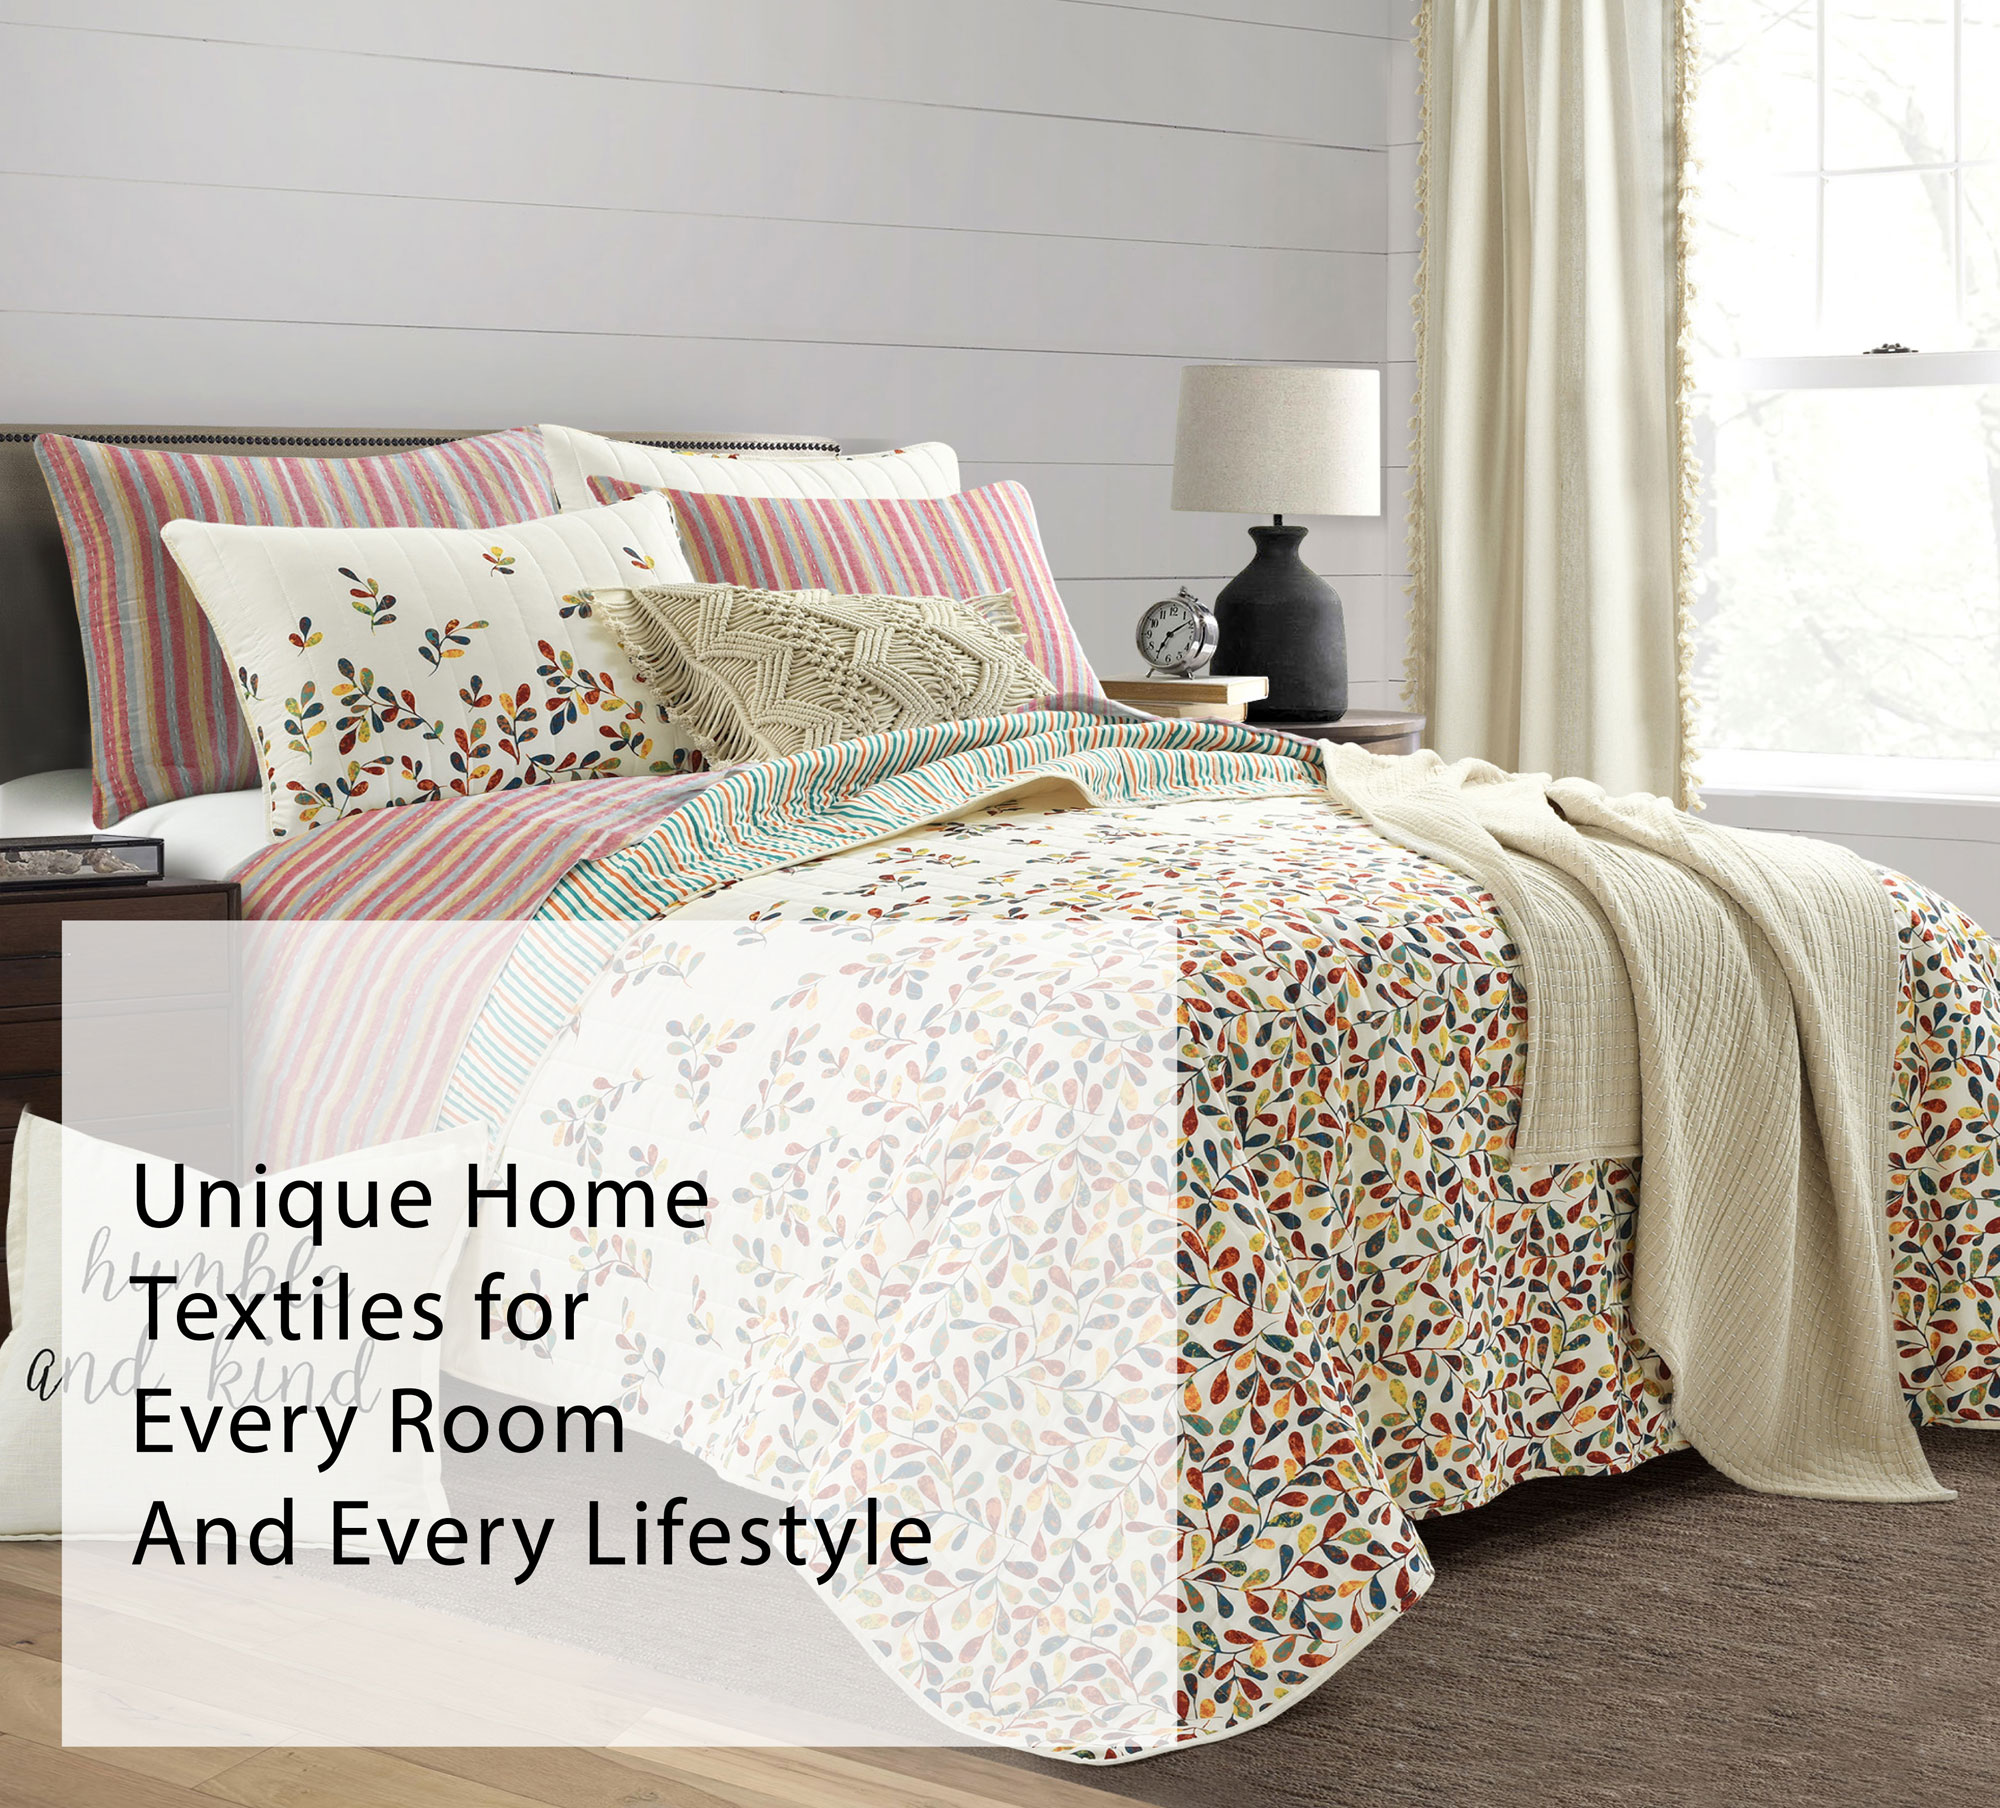 Unique Home Textiles for Every room and Every Lifestyle